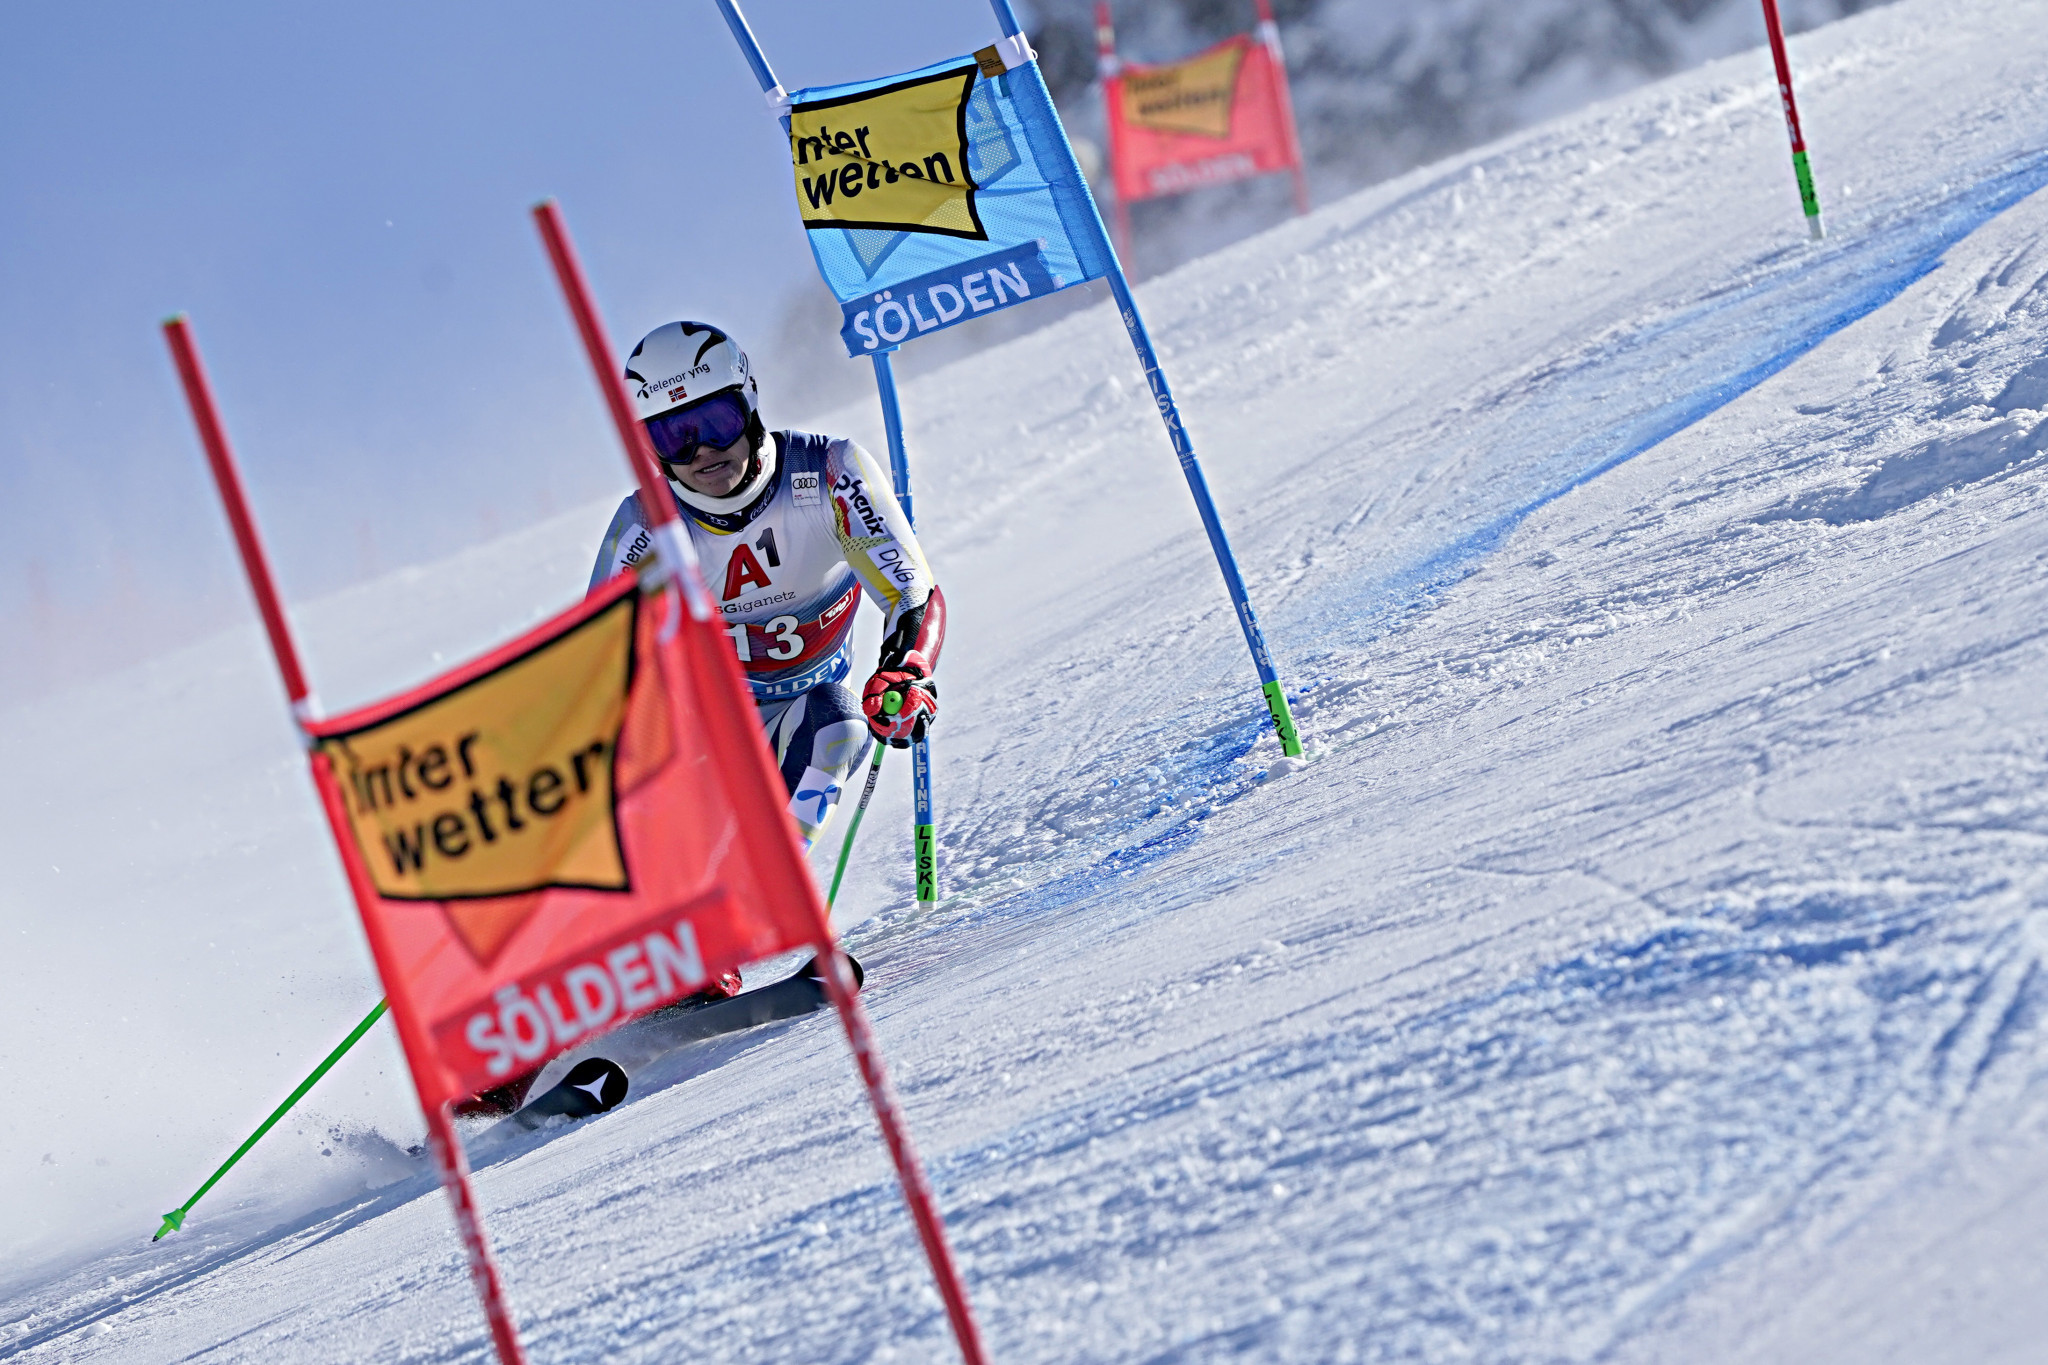 Lucas Braathen won the first race of the men's FIS Alpine Ski World Cup season ©Getty Images